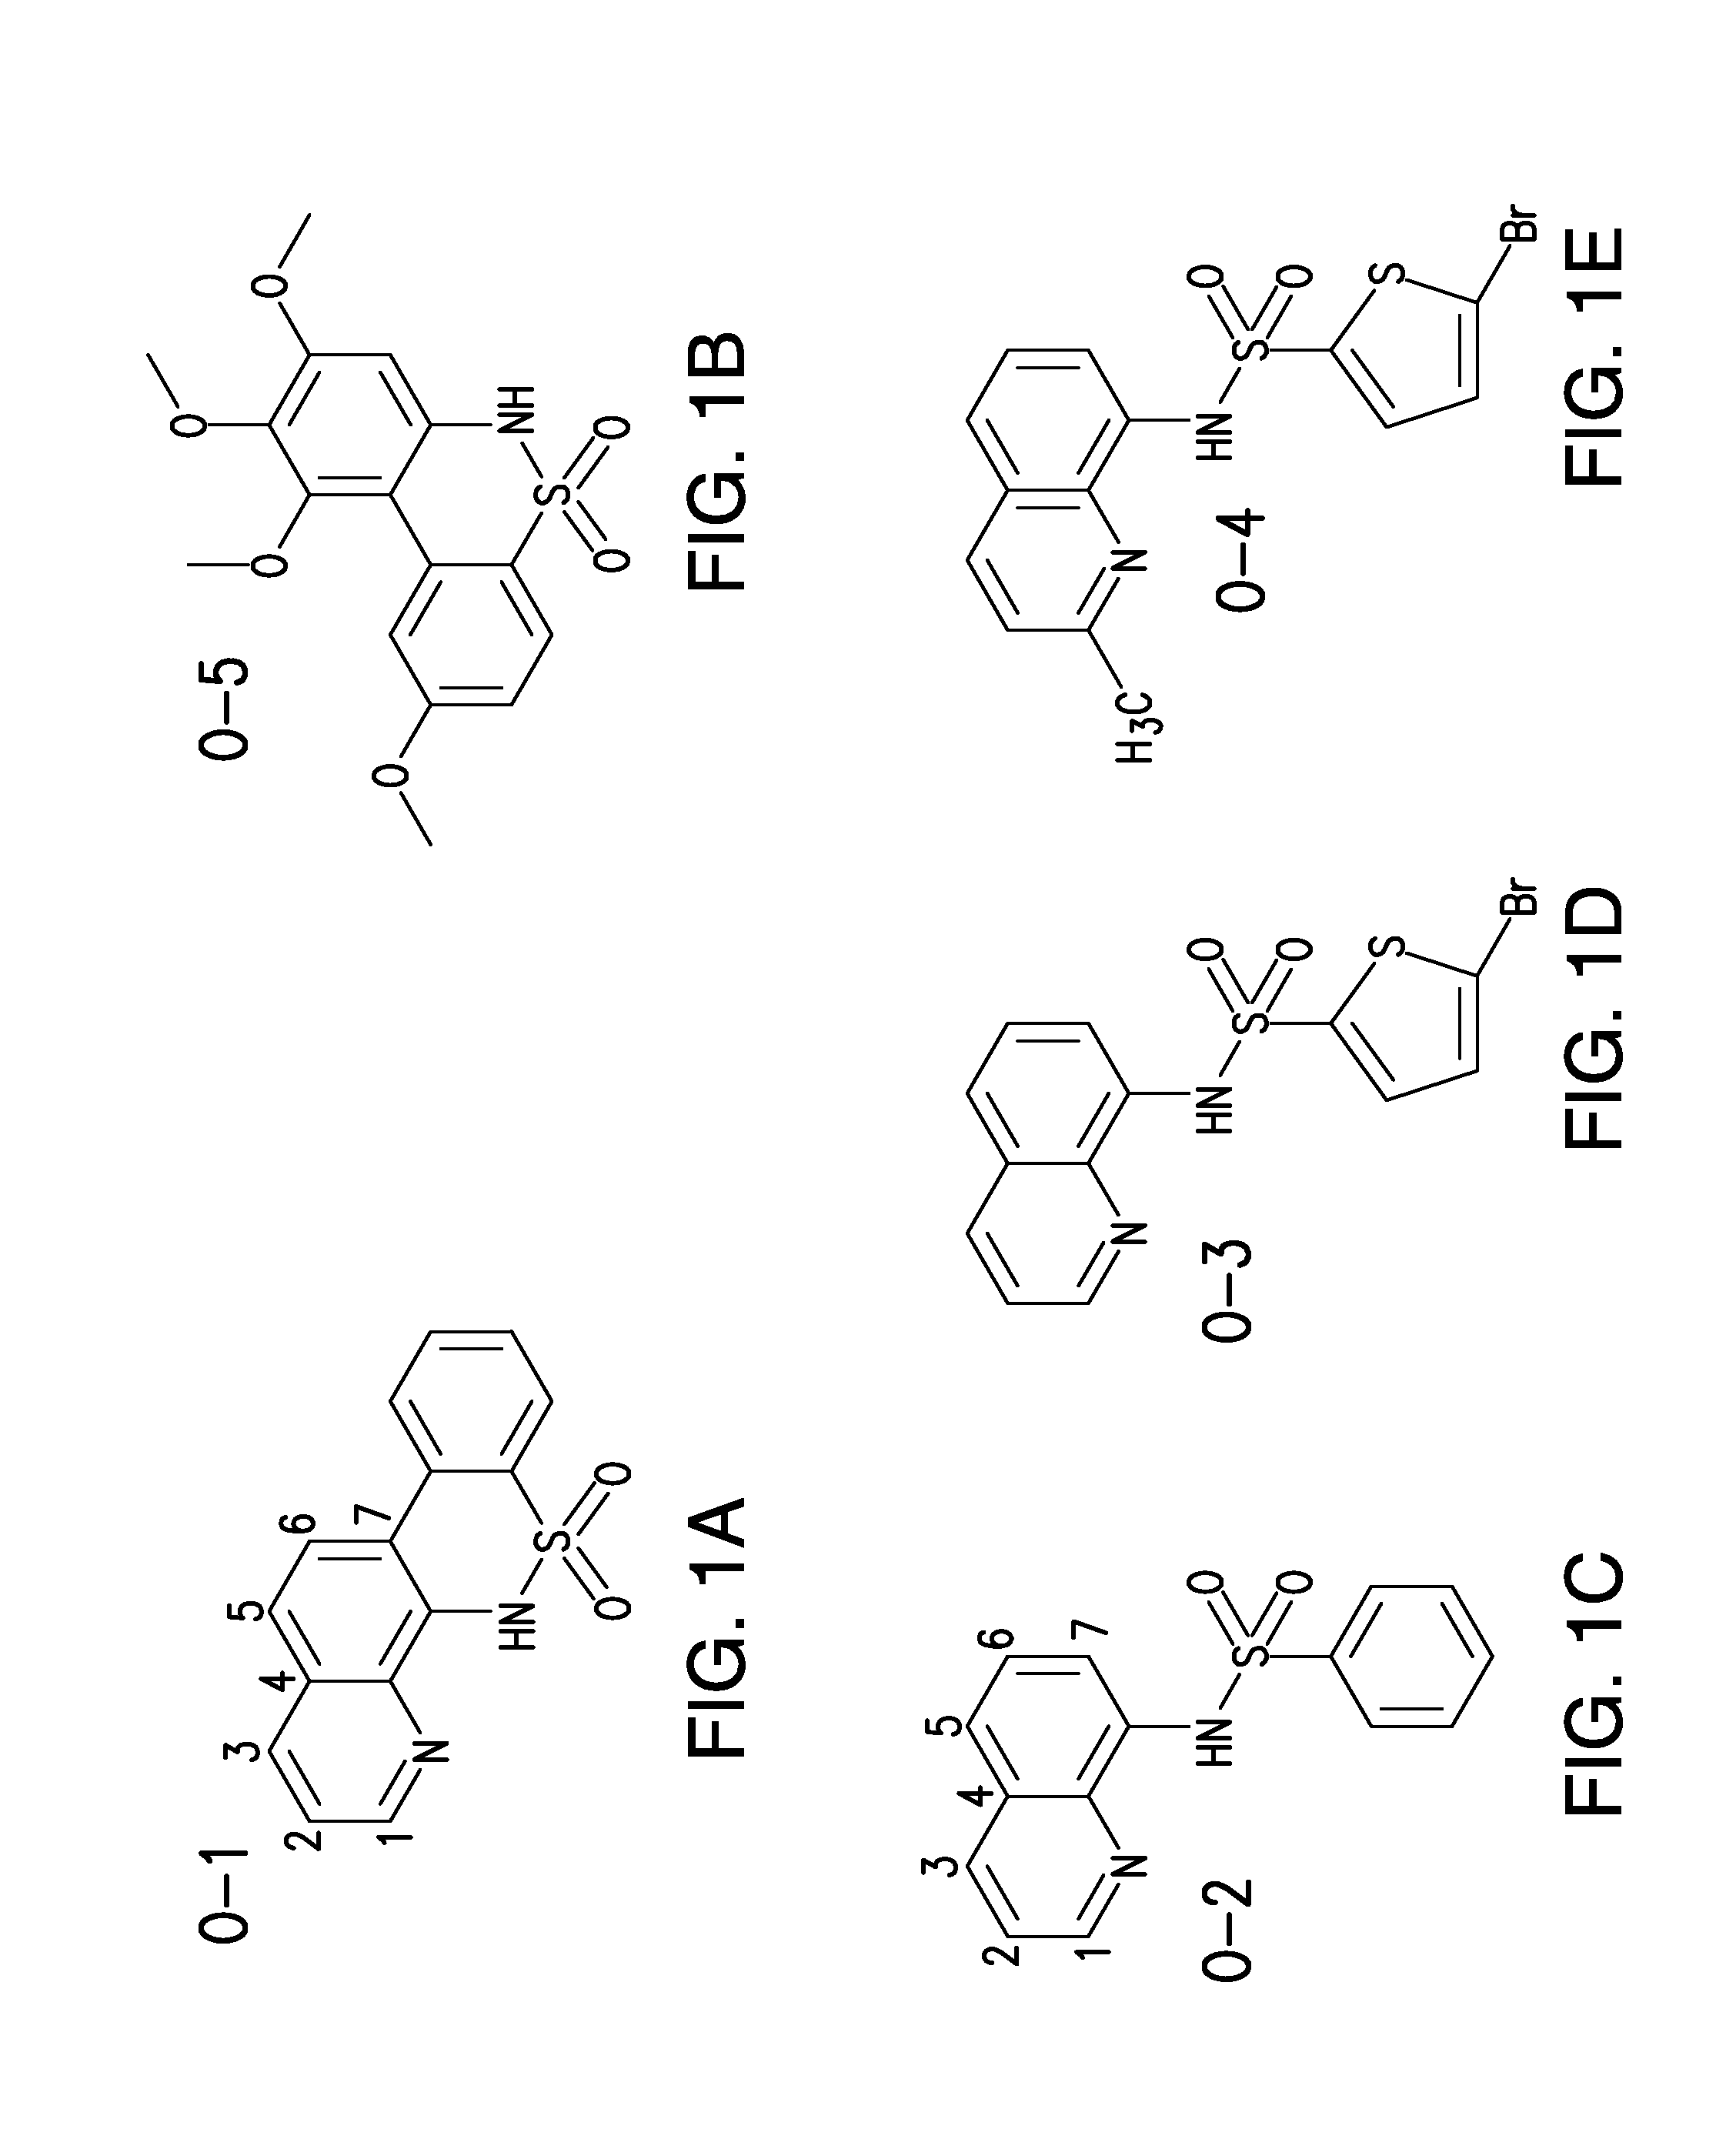 N-quinolin-benzensulfonamides and related compounds for the treatment of cancer, autoimmune disorders and inflammation